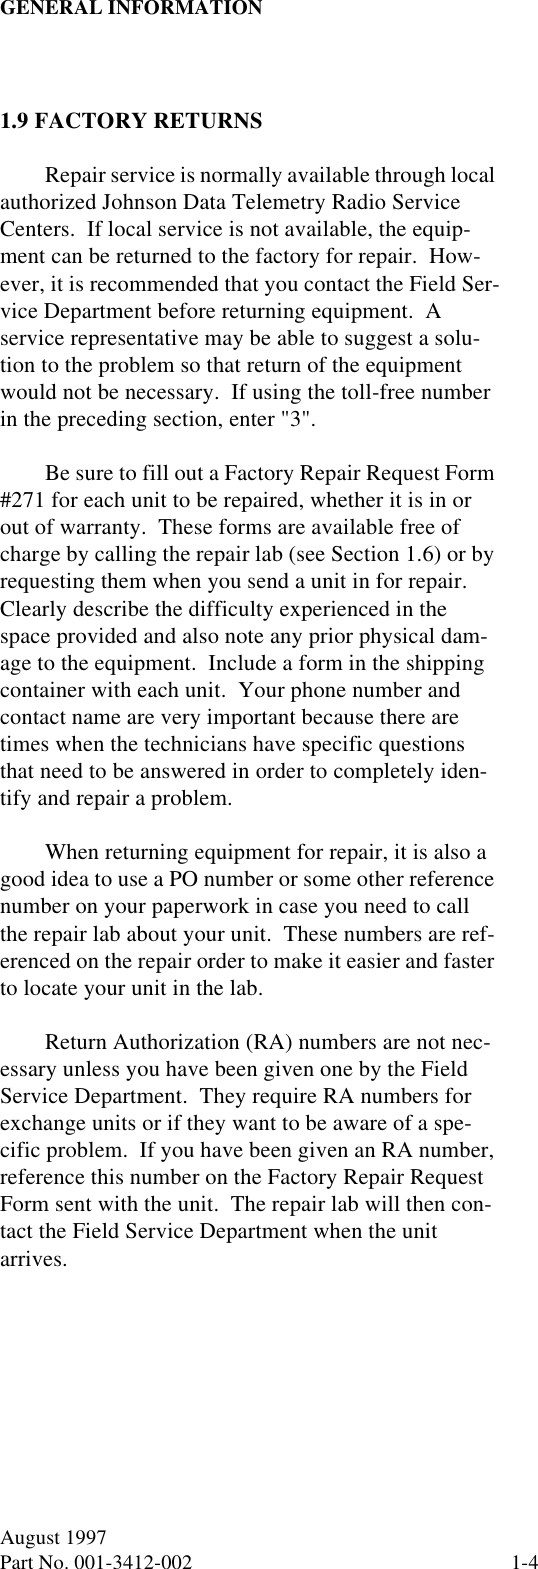 GENERAL INFORMATION1-4August 1997Part No. 001-3412-002 1.9 FACTORY RETURNSRepair service is normally available through local authorized Johnson Data Telemetry Radio Service Centers.  If local service is not available, the equip-ment can be returned to the factory for repair.  How-ever, it is recommended that you contact the Field Ser-vice Department before returning equipment.  A service representative may be able to suggest a solu-tion to the problem so that return of the equipment would not be necessary.  If using the toll-free number in the preceding section, enter &quot;3&quot;.Be sure to fill out a Factory Repair Request Form #271 for each unit to be repaired, whether it is in or out of warranty.  These forms are available free of charge by calling the repair lab (see Section 1.6) or by requesting them when you send a unit in for repair.  Clearly describe the difficulty experienced in the space provided and also note any prior physical dam-age to the equipment.  Include a form in the shipping container with each unit.  Your phone number and contact name are very important because there are times when the technicians have specific questions that need to be answered in order to completely iden-tify and repair a problem.When returning equipment for repair, it is also a good idea to use a PO number or some other reference number on your paperwork in case you need to call the repair lab about your unit.  These numbers are ref-erenced on the repair order to make it easier and faster to locate your unit in the lab.Return Authorization (RA) numbers are not nec-essary unless you have been given one by the Field Service Department.  They require RA numbers for exchange units or if they want to be aware of a spe-cific problem.  If you have been given an RA number, reference this number on the Factory Repair Request Form sent with the unit.  The repair lab will then con-tact the Field Service Department when the unit arrives.